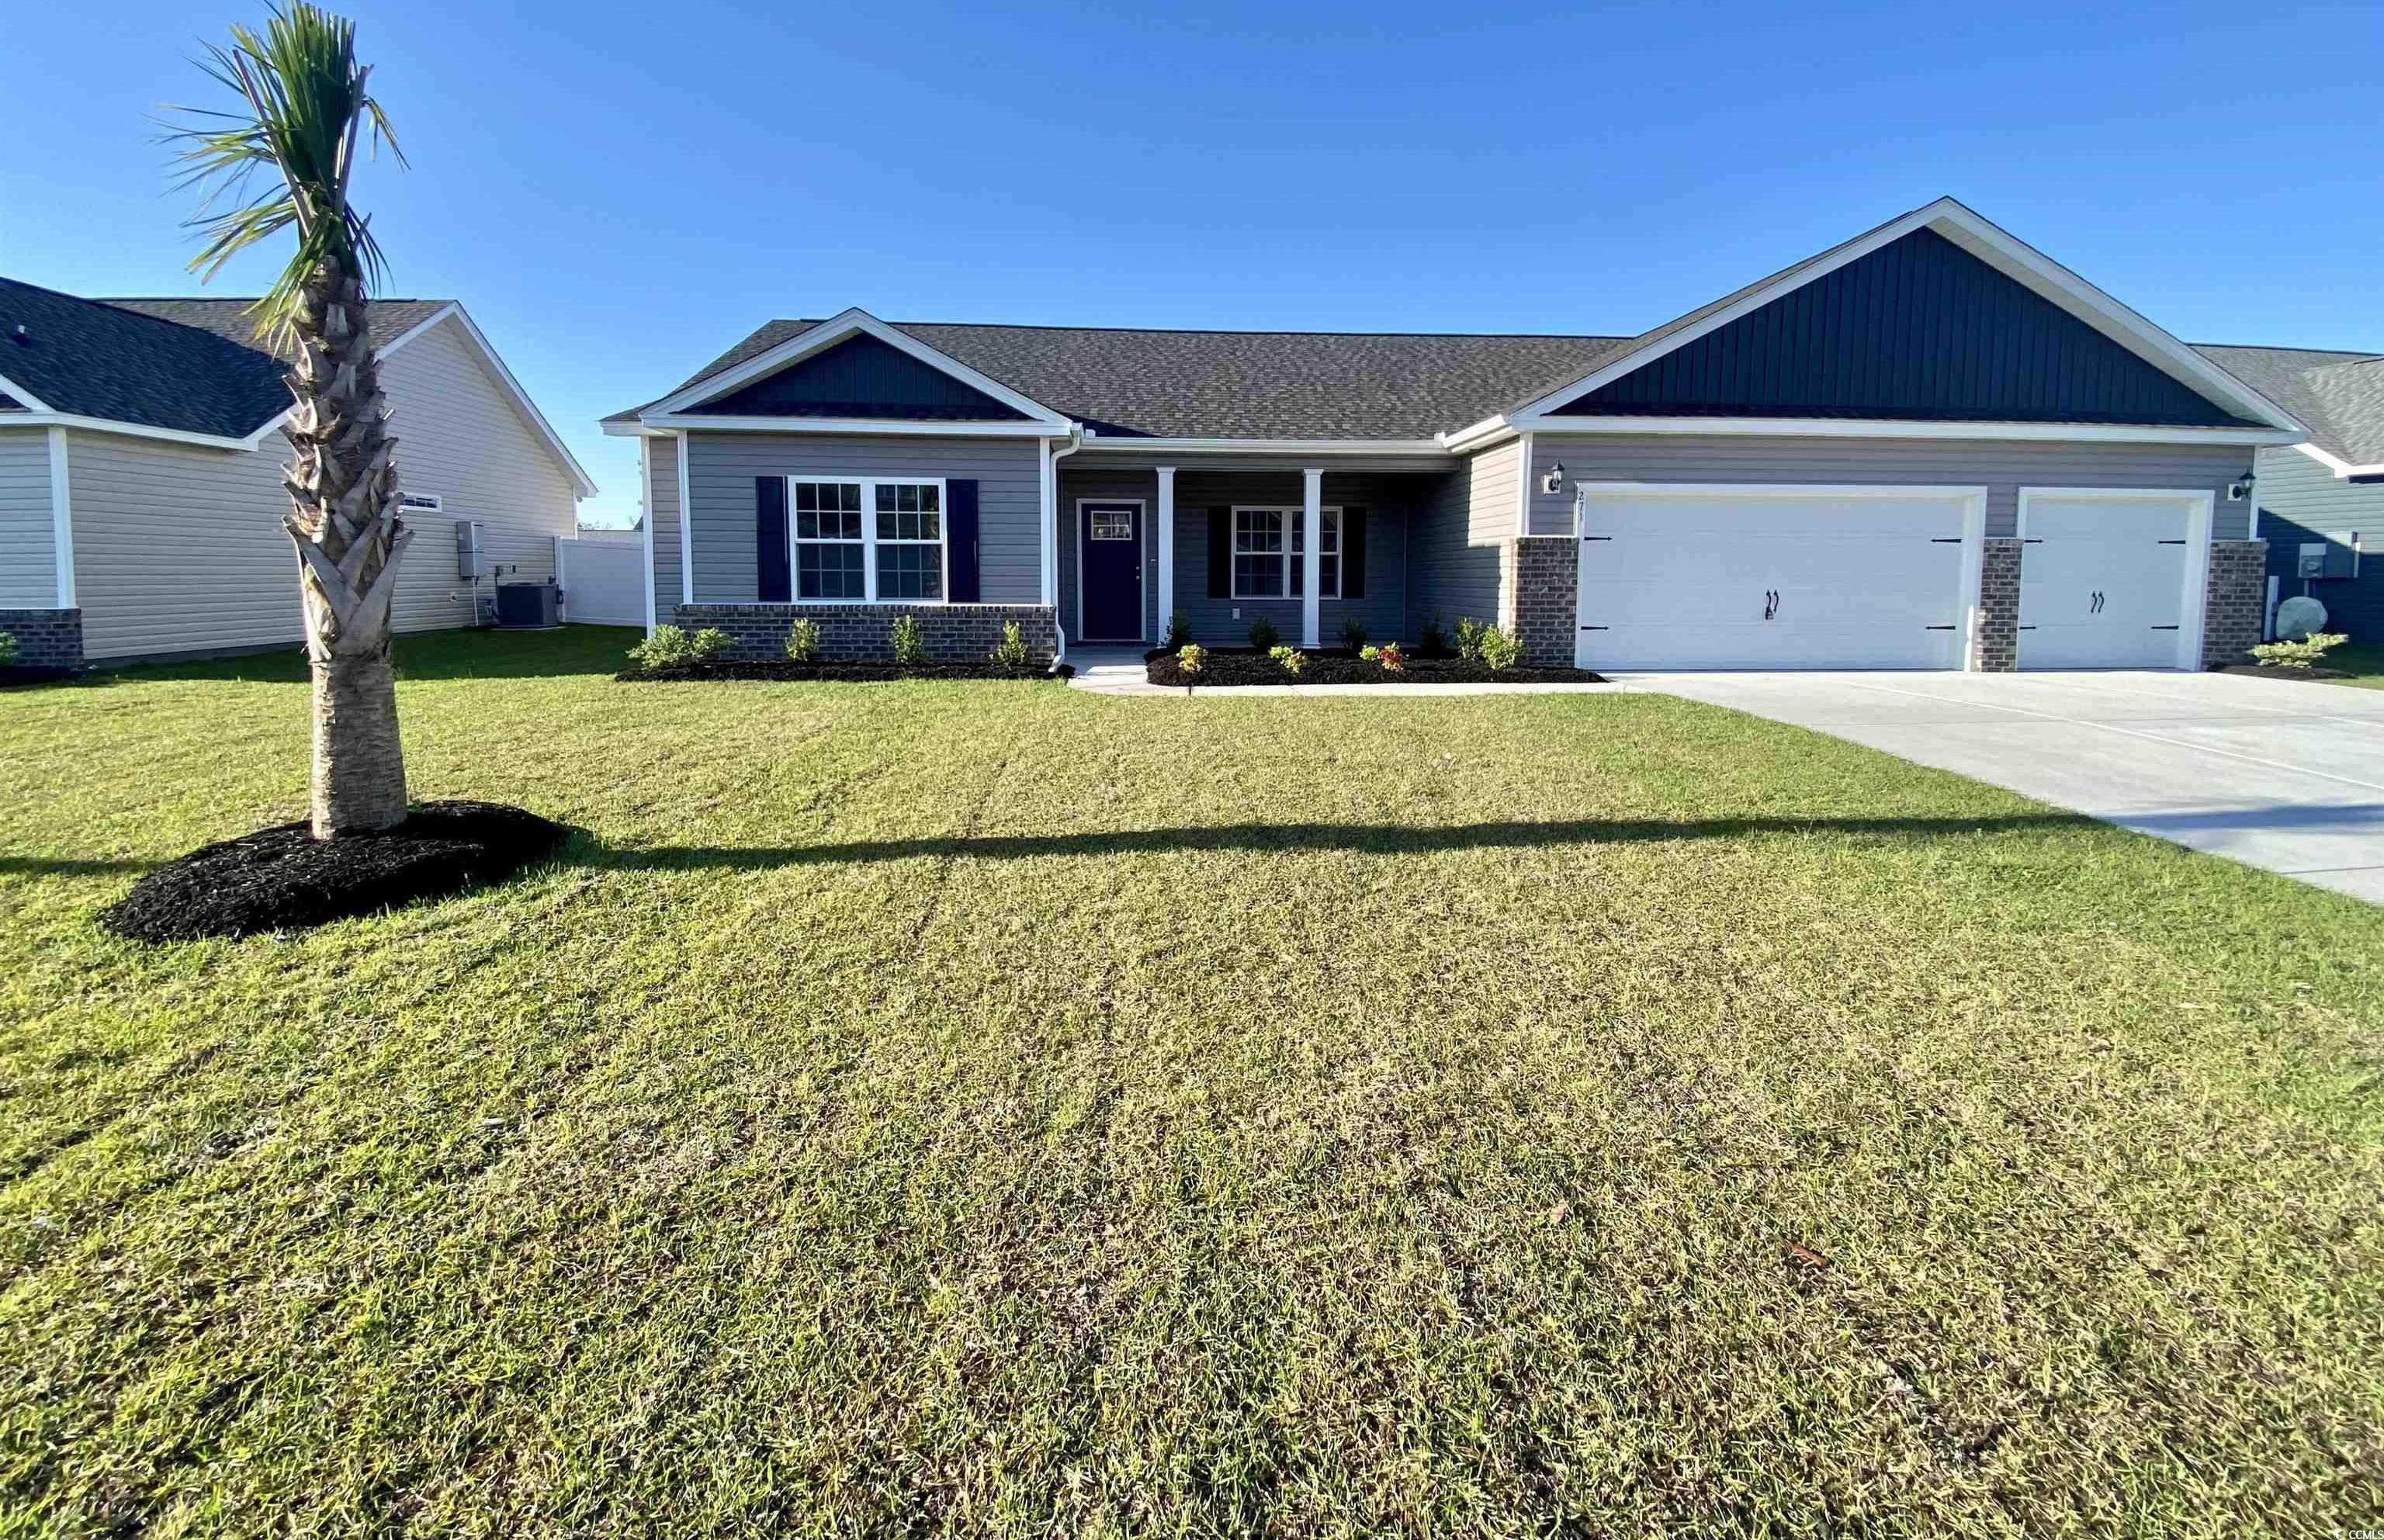 Photo one of 271 Lifestyle Court Surfside Beach SC 29575 | MLS 2318965